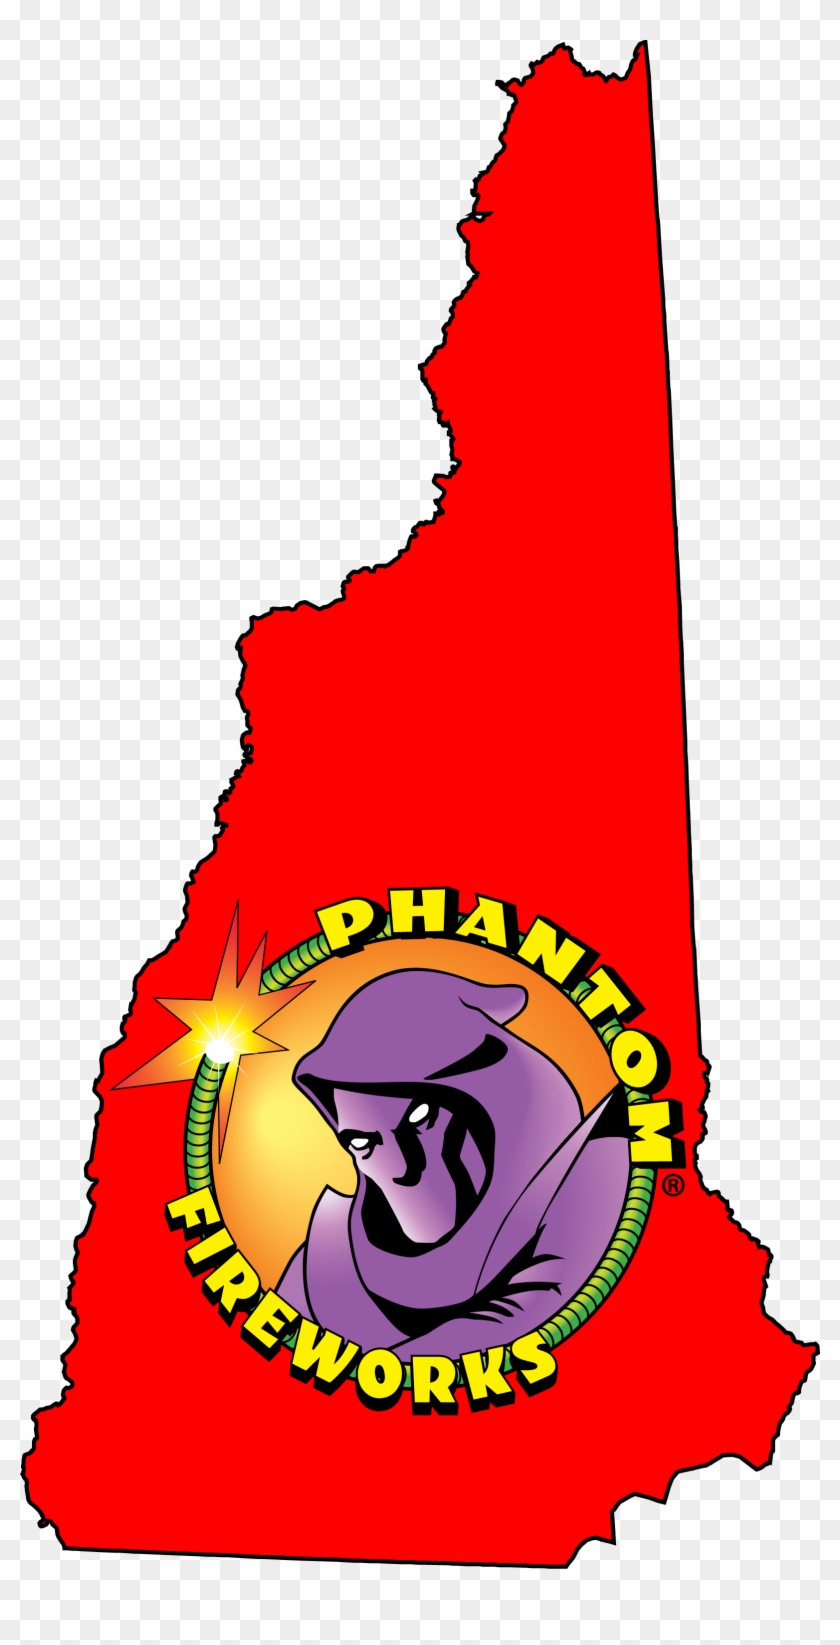 Phantom Fireworks Locations New Hampshire - New Hampshire State Outline With Flag Clipart #3100373